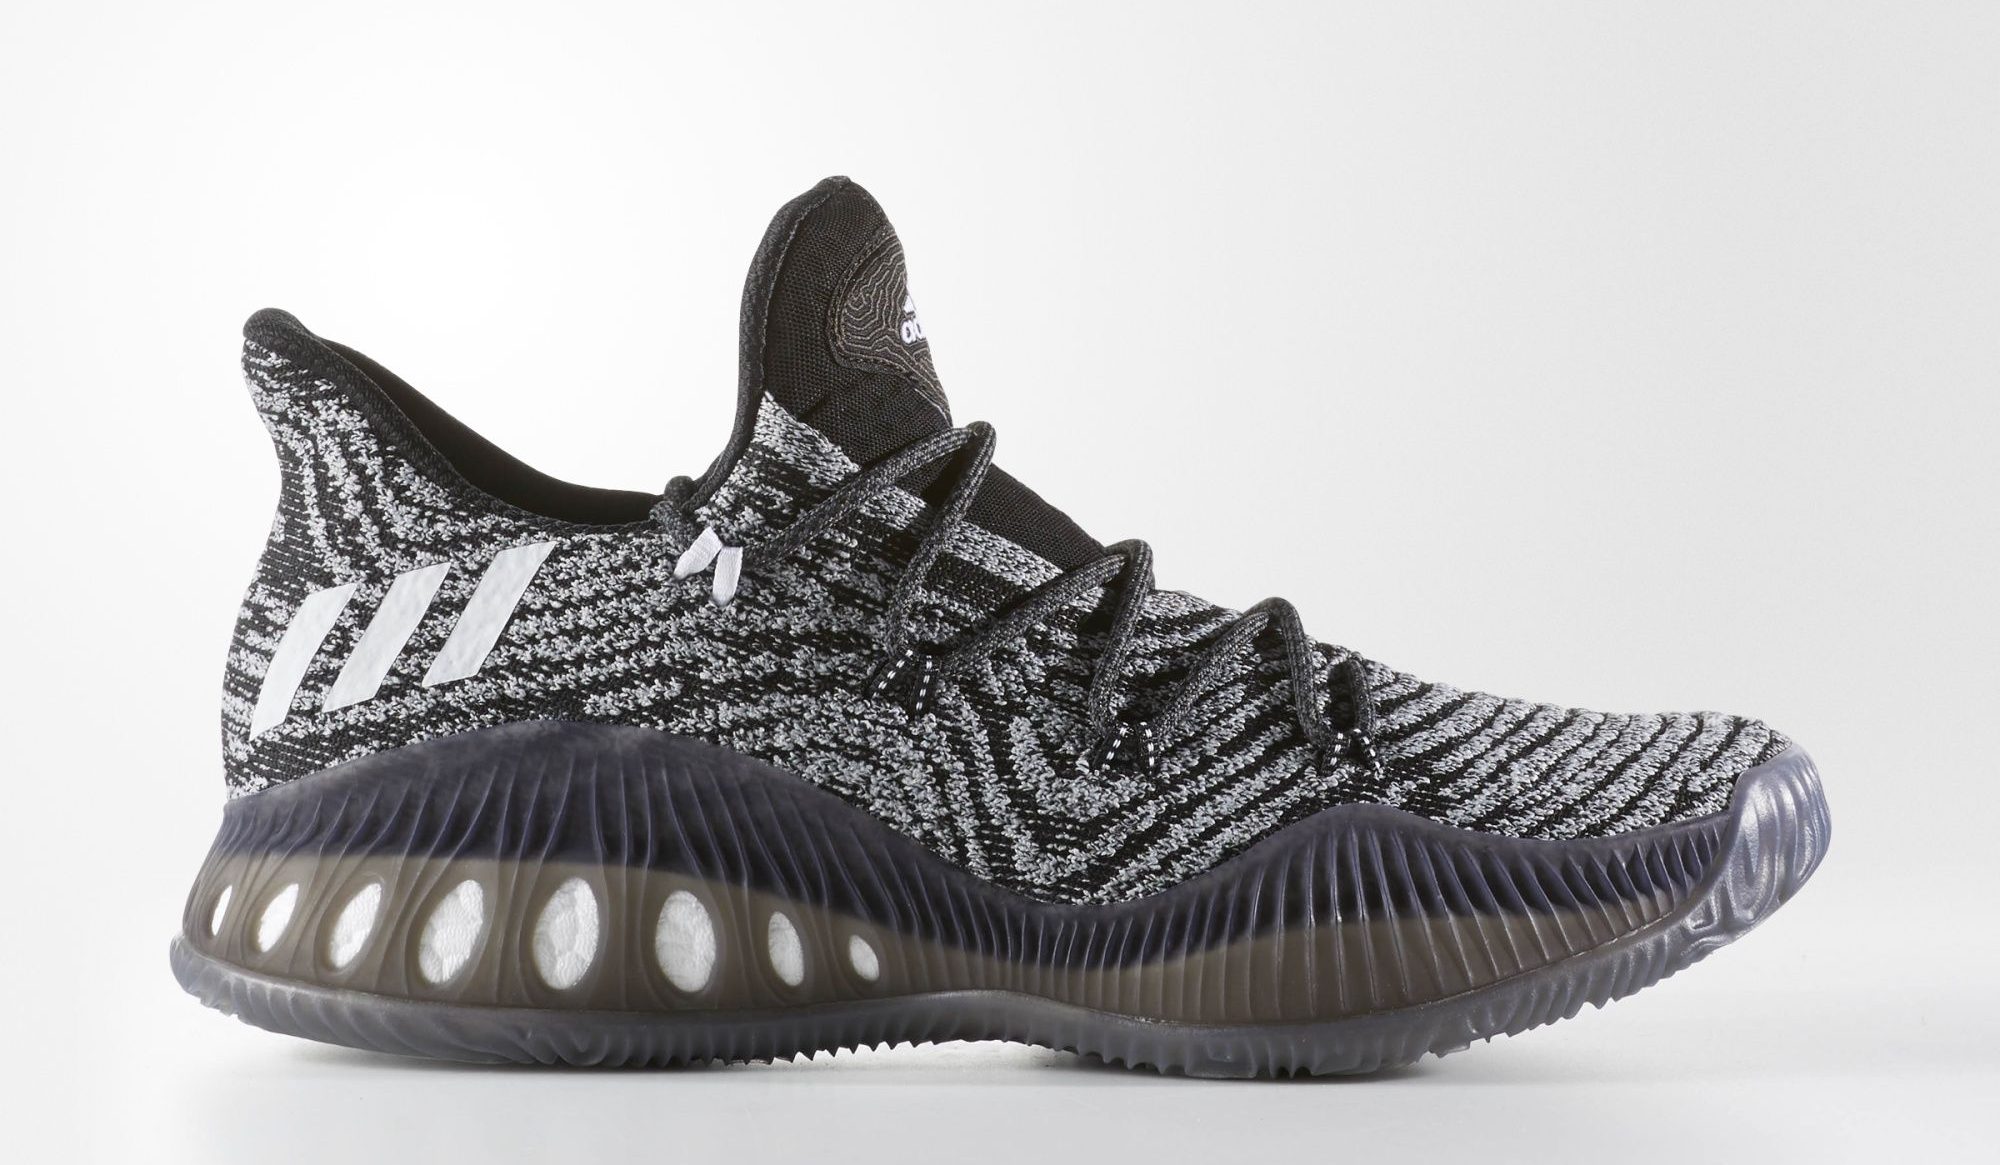 More Images of an adidas Crazy Explosive Low Andrew Wiggins PE Surface -  WearTesters